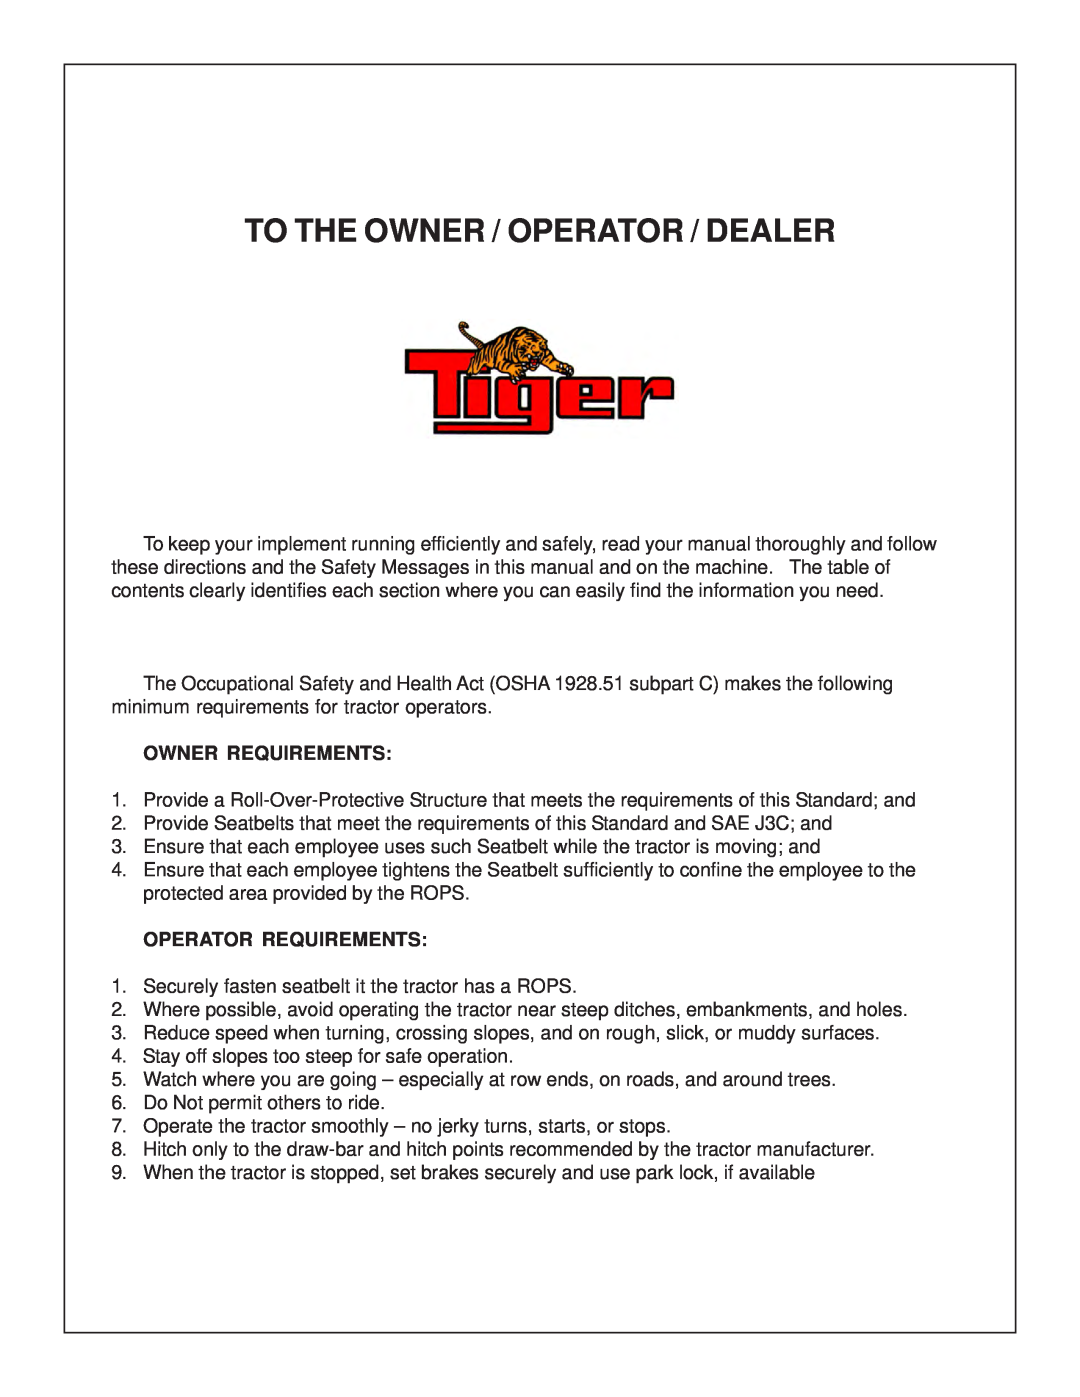 Tiger Products Co., Ltd TS 100A manual To The Owner / Operator / Dealer, Owner Requirements, Operator Requirements 